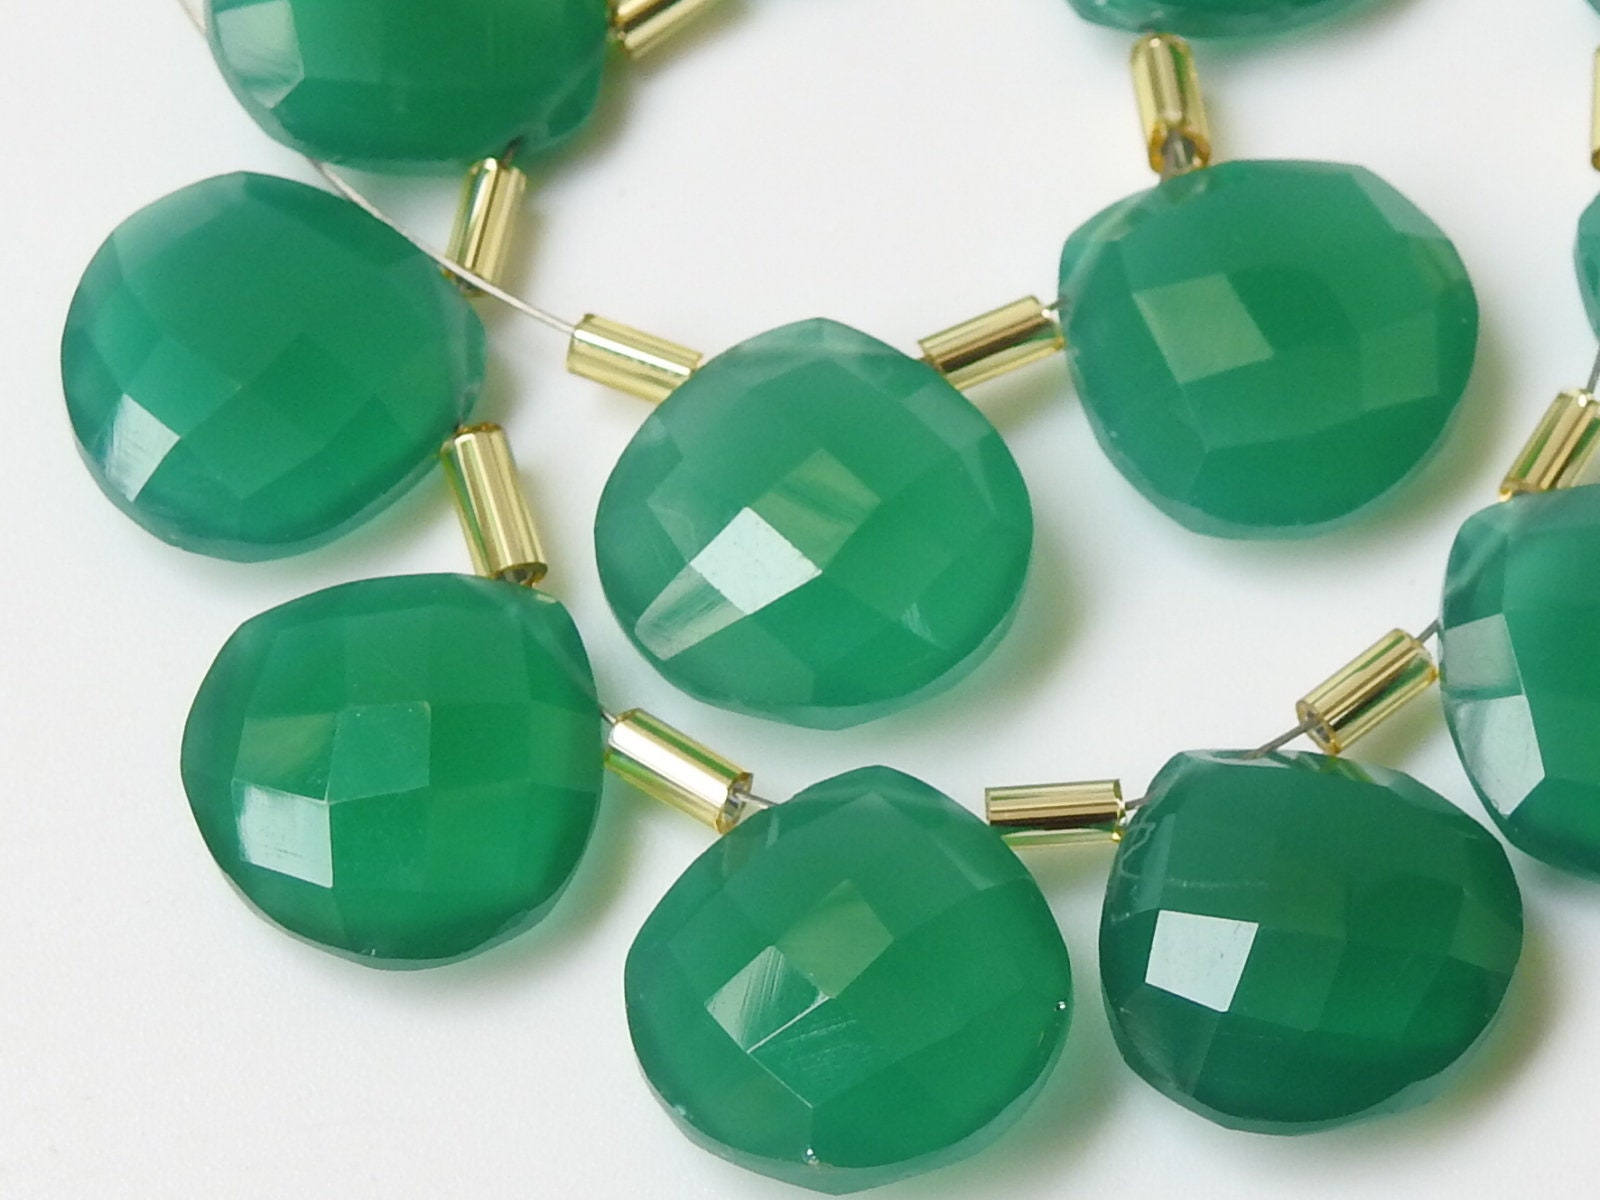 Green Onyx Hearts,Micro Faceted,Teardrop,Drop,Handmade,Earrings Pair,Loose Stone,For Making Jewelry,Wholesaler,Supplies,14X14MM PME-CY1 | Save 33% - Rajasthan Living 11